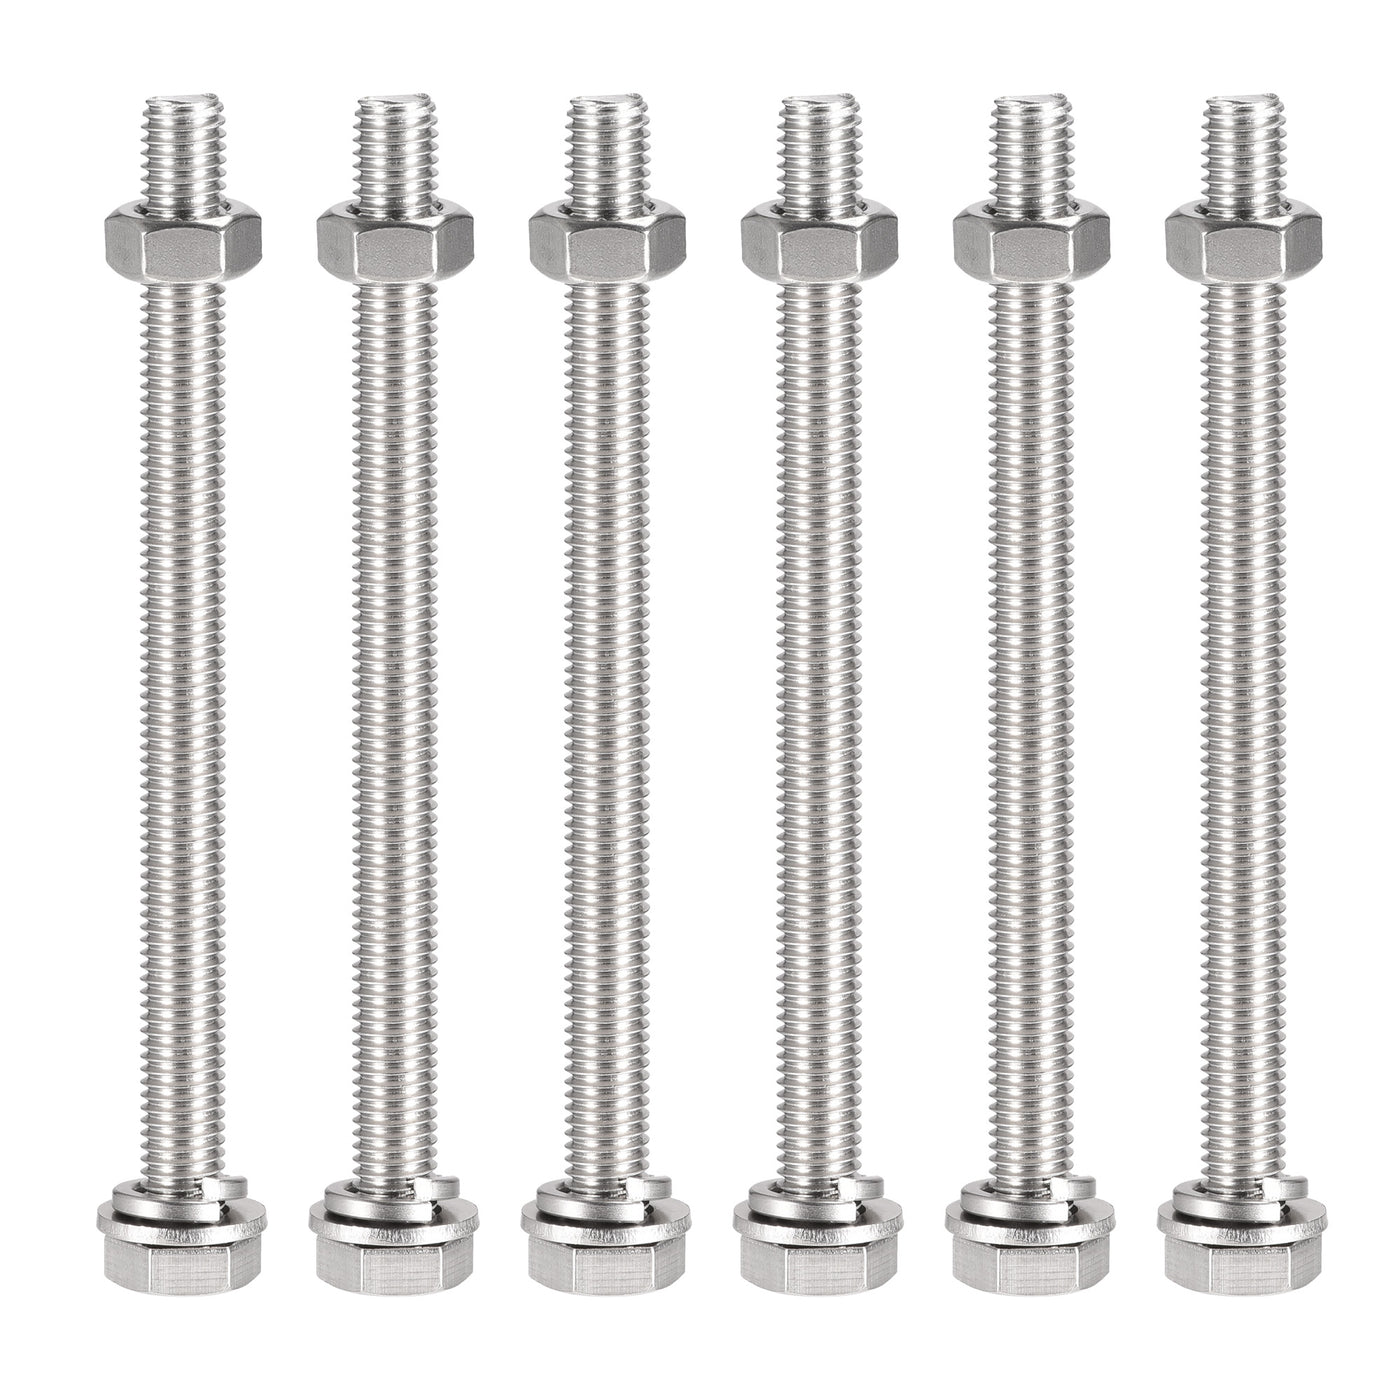 Uxcell Uxcell M10 x 140mm Hex Head Screws Bolts, Nuts, Flat & Lock Washers Kits, 304 Stainless Steel Fully Thread Hexagon Bolts 6 Sets